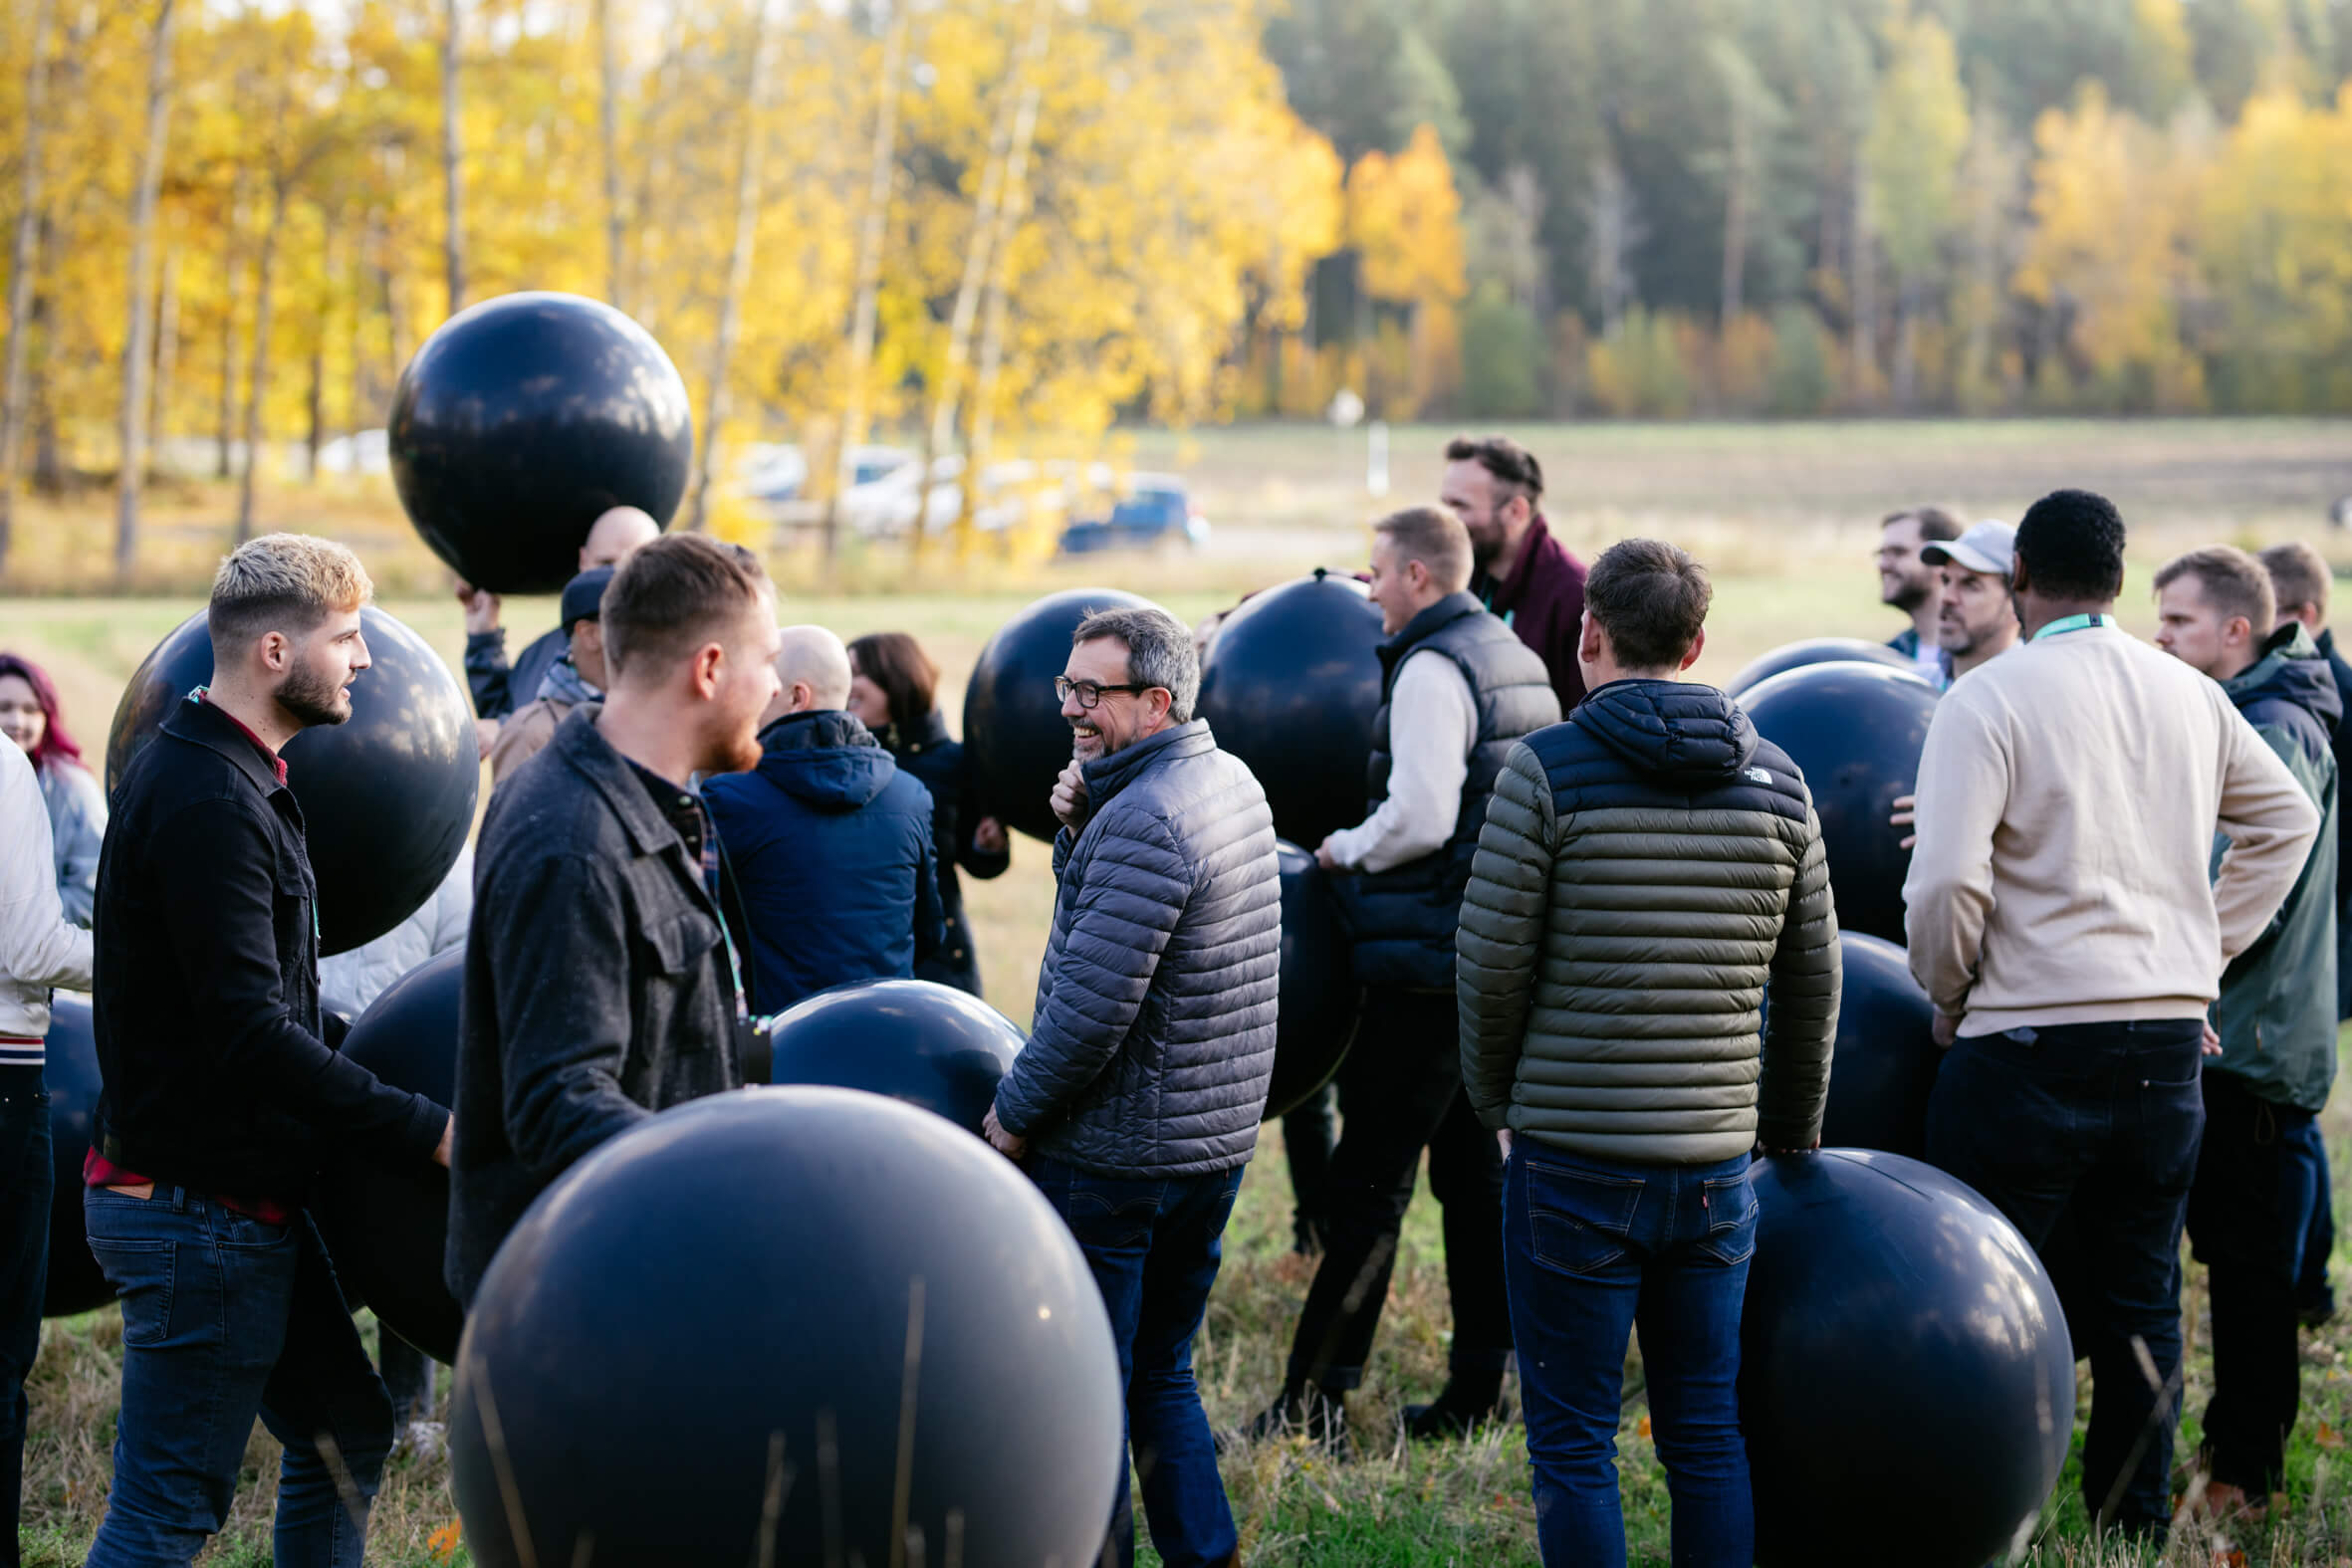 people-outdoors-team-building-activity-with-black-balloons